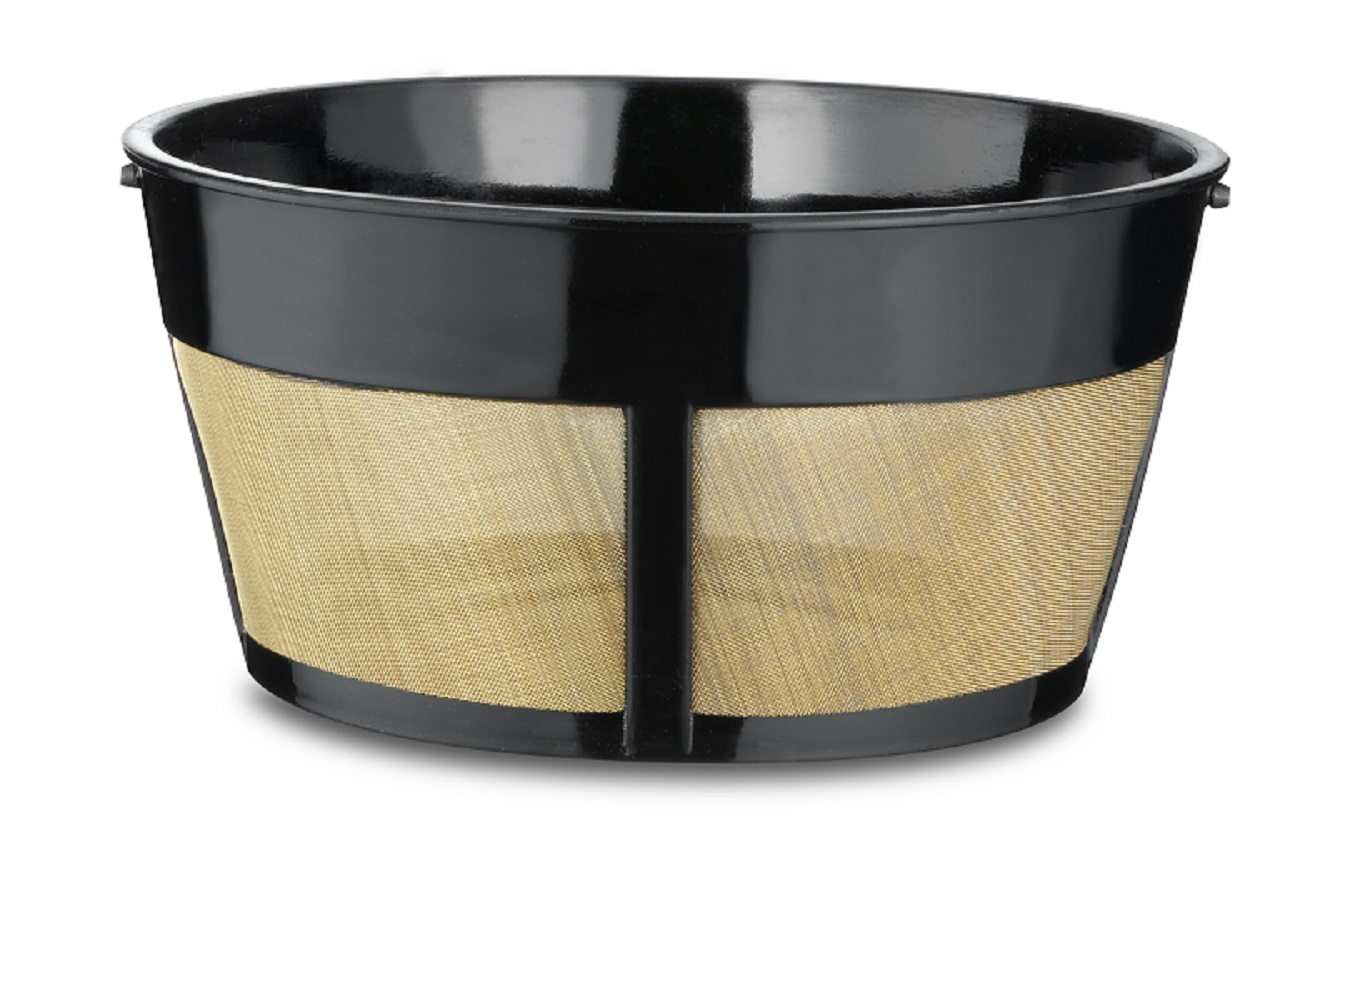 12 Cup Basket Universal Permanent Stainless Steel Coffee Filter by Cafe-Brew Collection - image 1 of 5